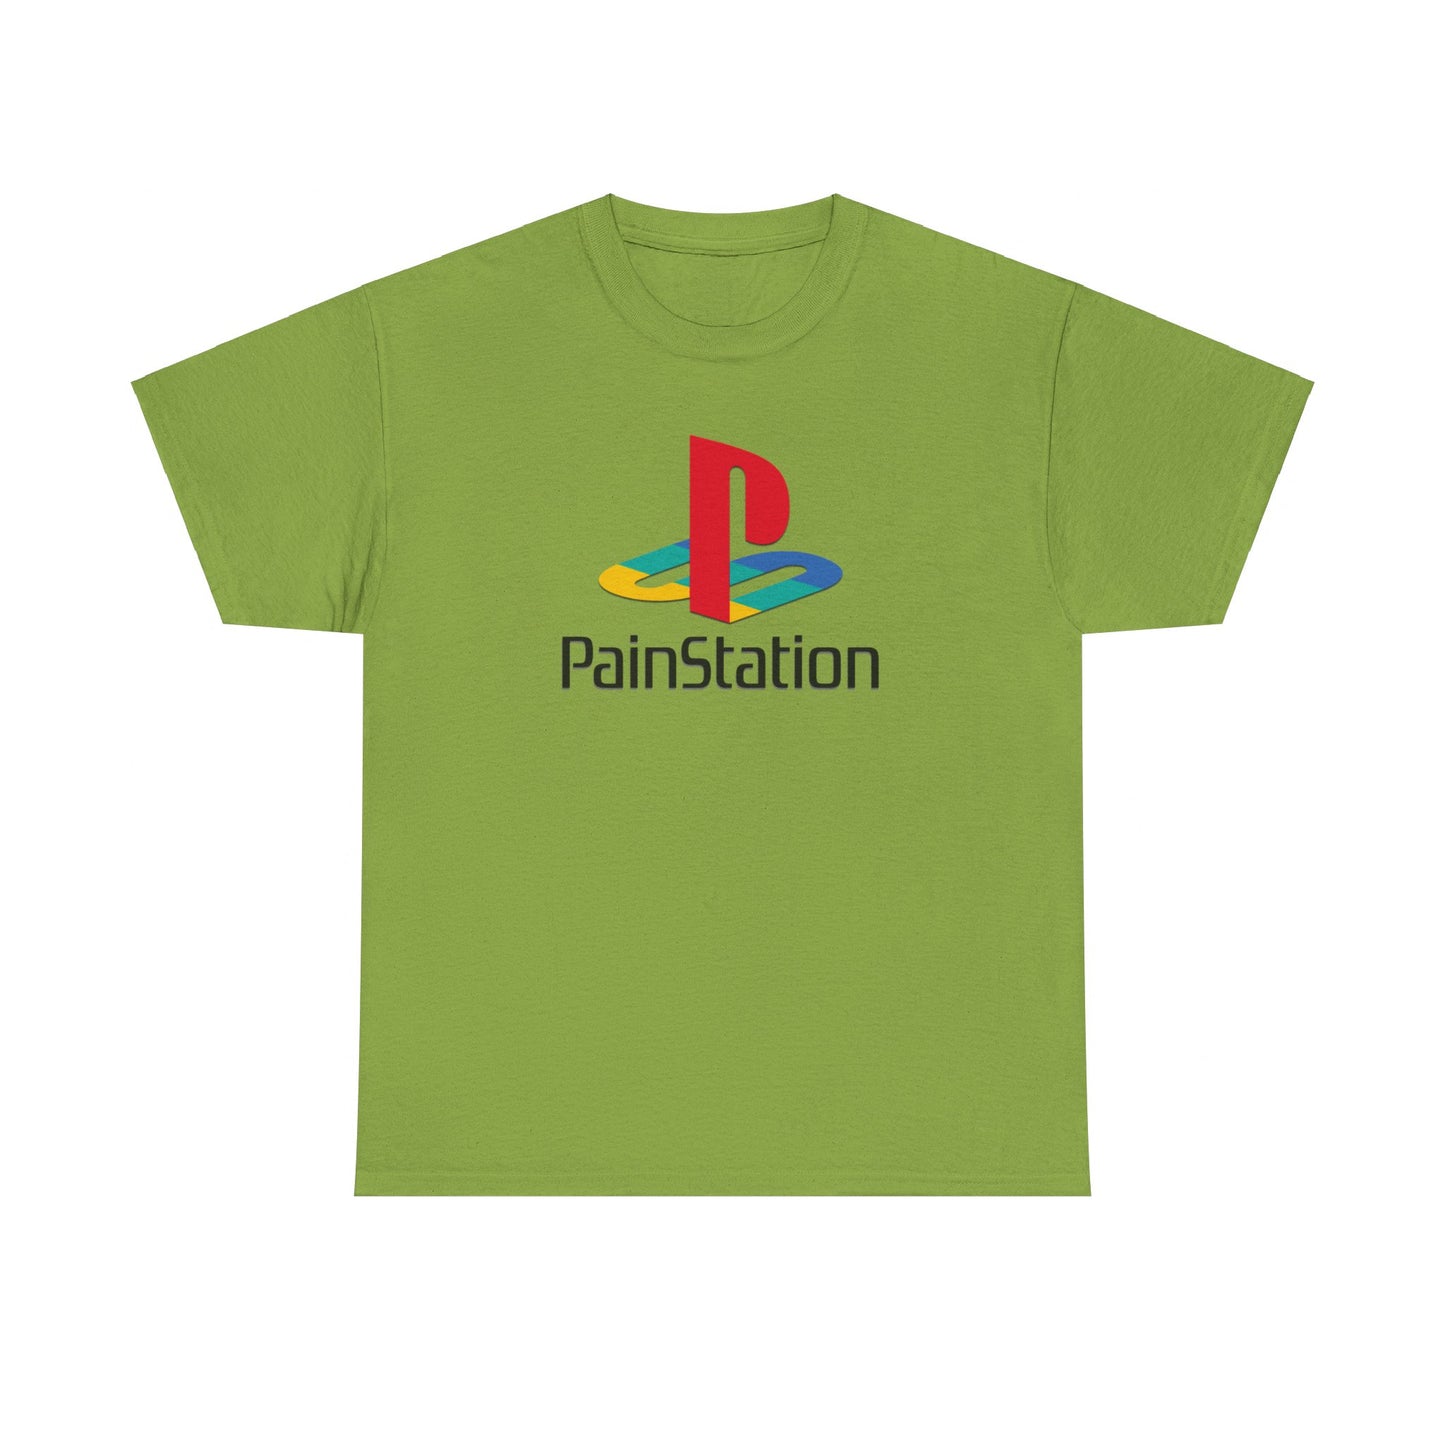 Playstation gaming Shirt ideal for everybody that loves gaming, perfect gift for teenagers or friends that have a Playstation, Playstation Logo sample remix T-Shirt, Playstation Logo Shirt, Funny Meme Clothing, Gamer Clothing, Cool Shirt, Paistation Playstation sample Shirt, Funny statement T-Shirt